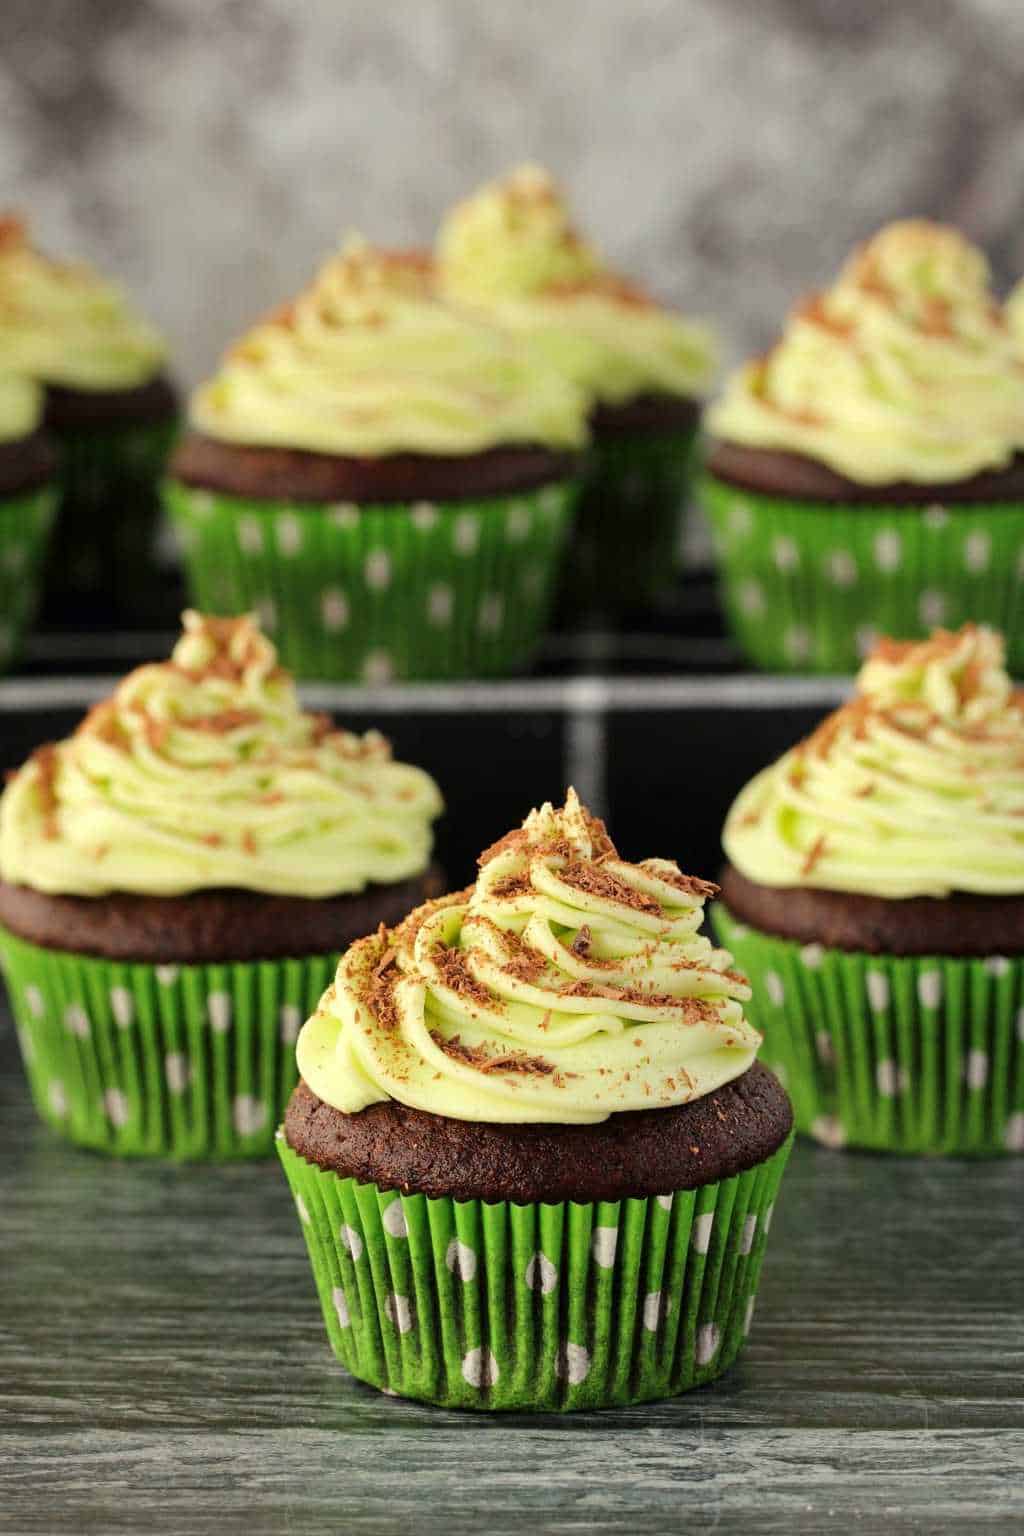 Vegan chocolate cupcakes topped with mint buttercream frosting against a dark background. 